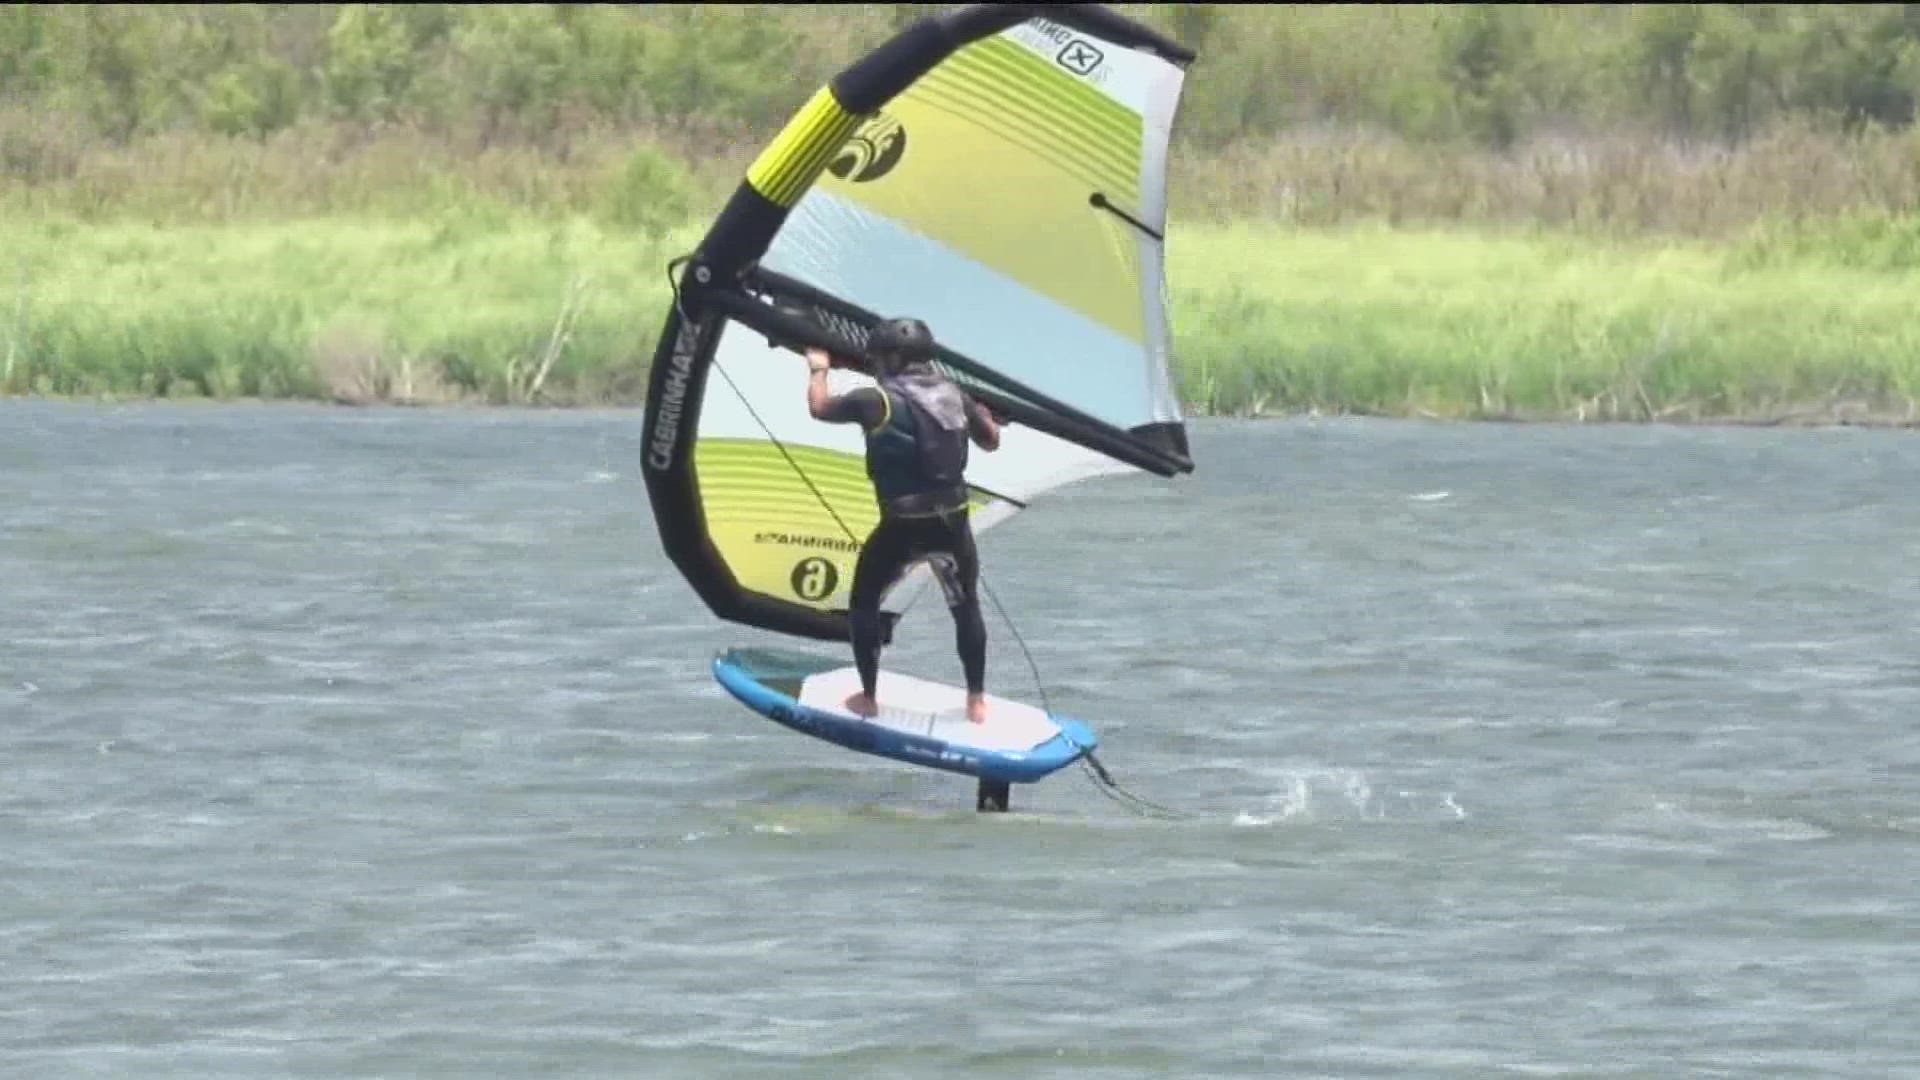 As the lake remains closed, a petition has been circulating to reopen the area for windsurfing, paddle boarding, kayaking, and other water activities.